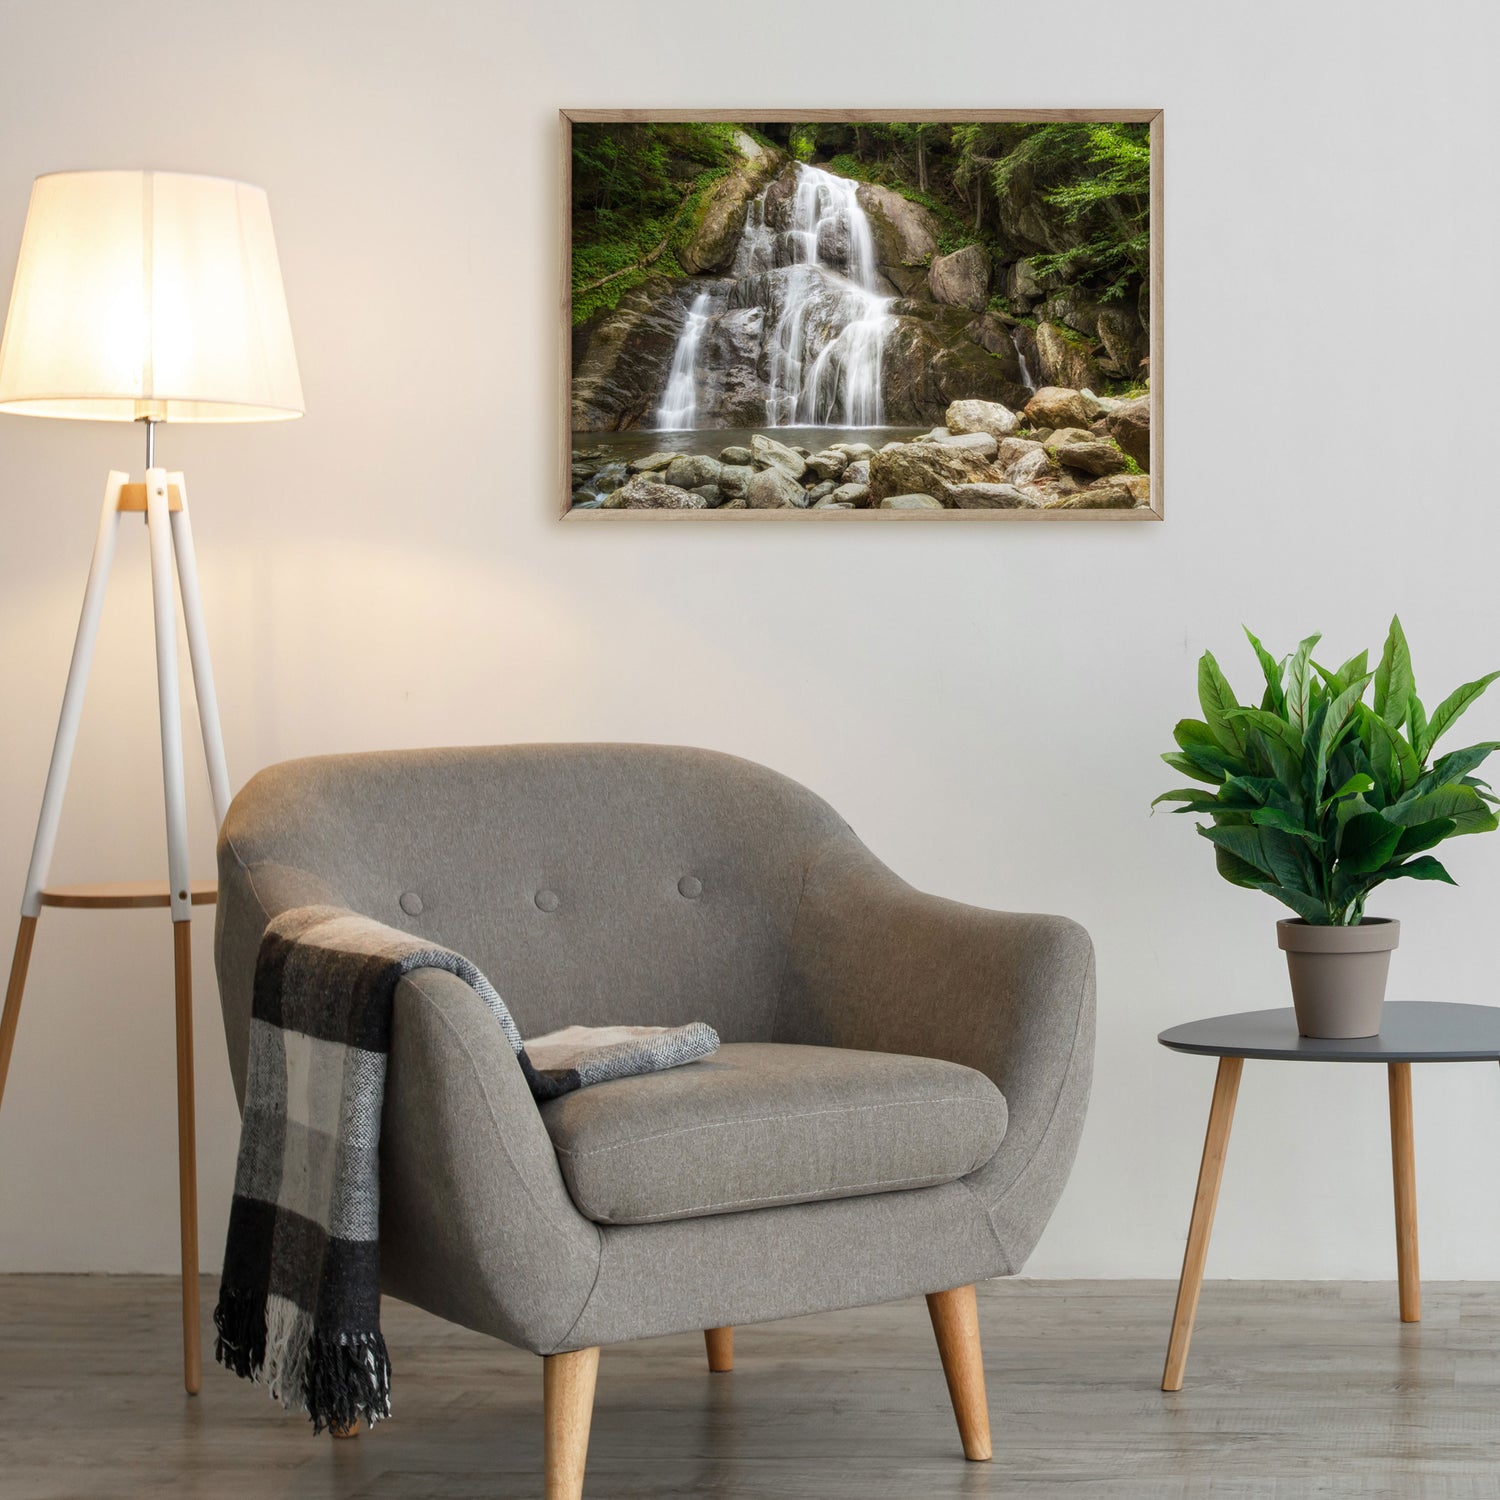 From cascading waters to verdant surroundings, this Vermont Art piece celebrates the captivating beauty of the natural world."